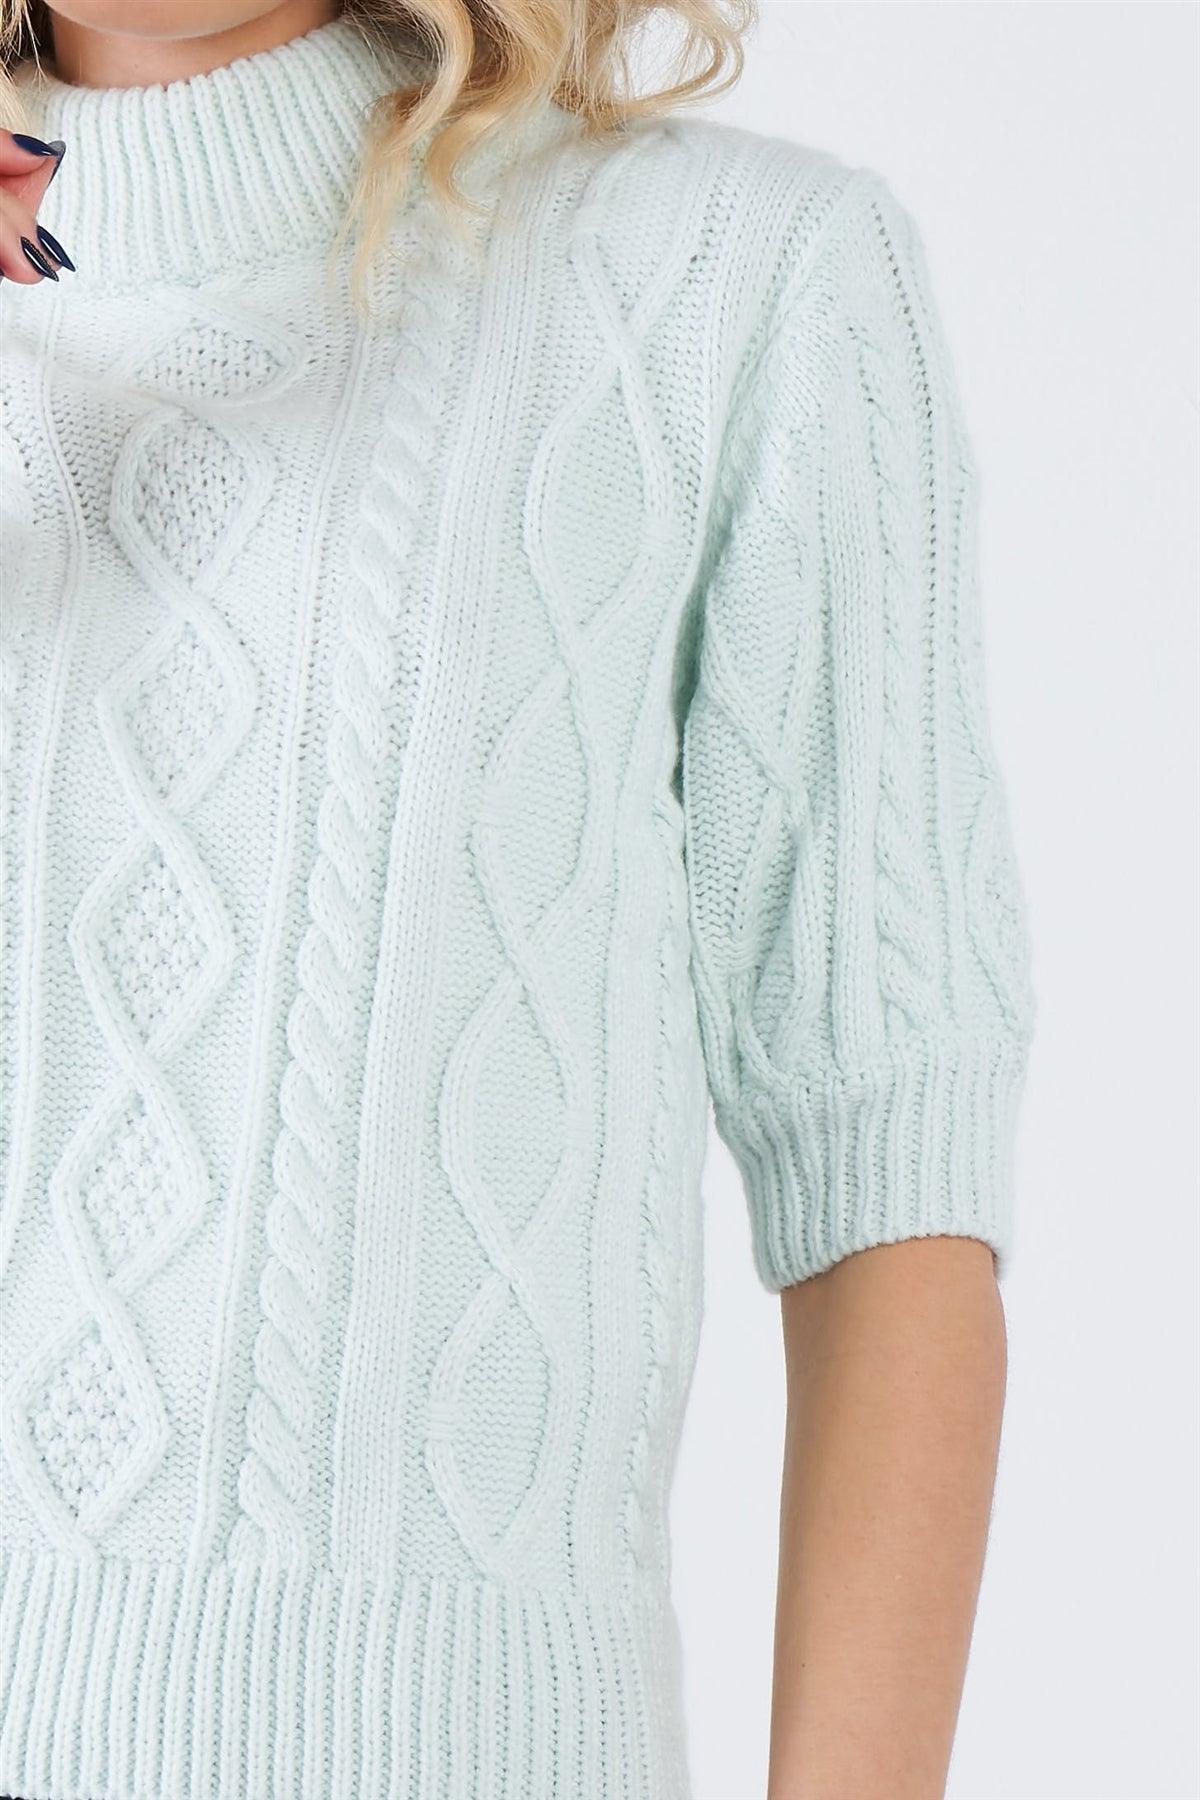 Cloud Blue Cable Knit Casual 3/4 Sleeve Mock Neck Chic Sweater